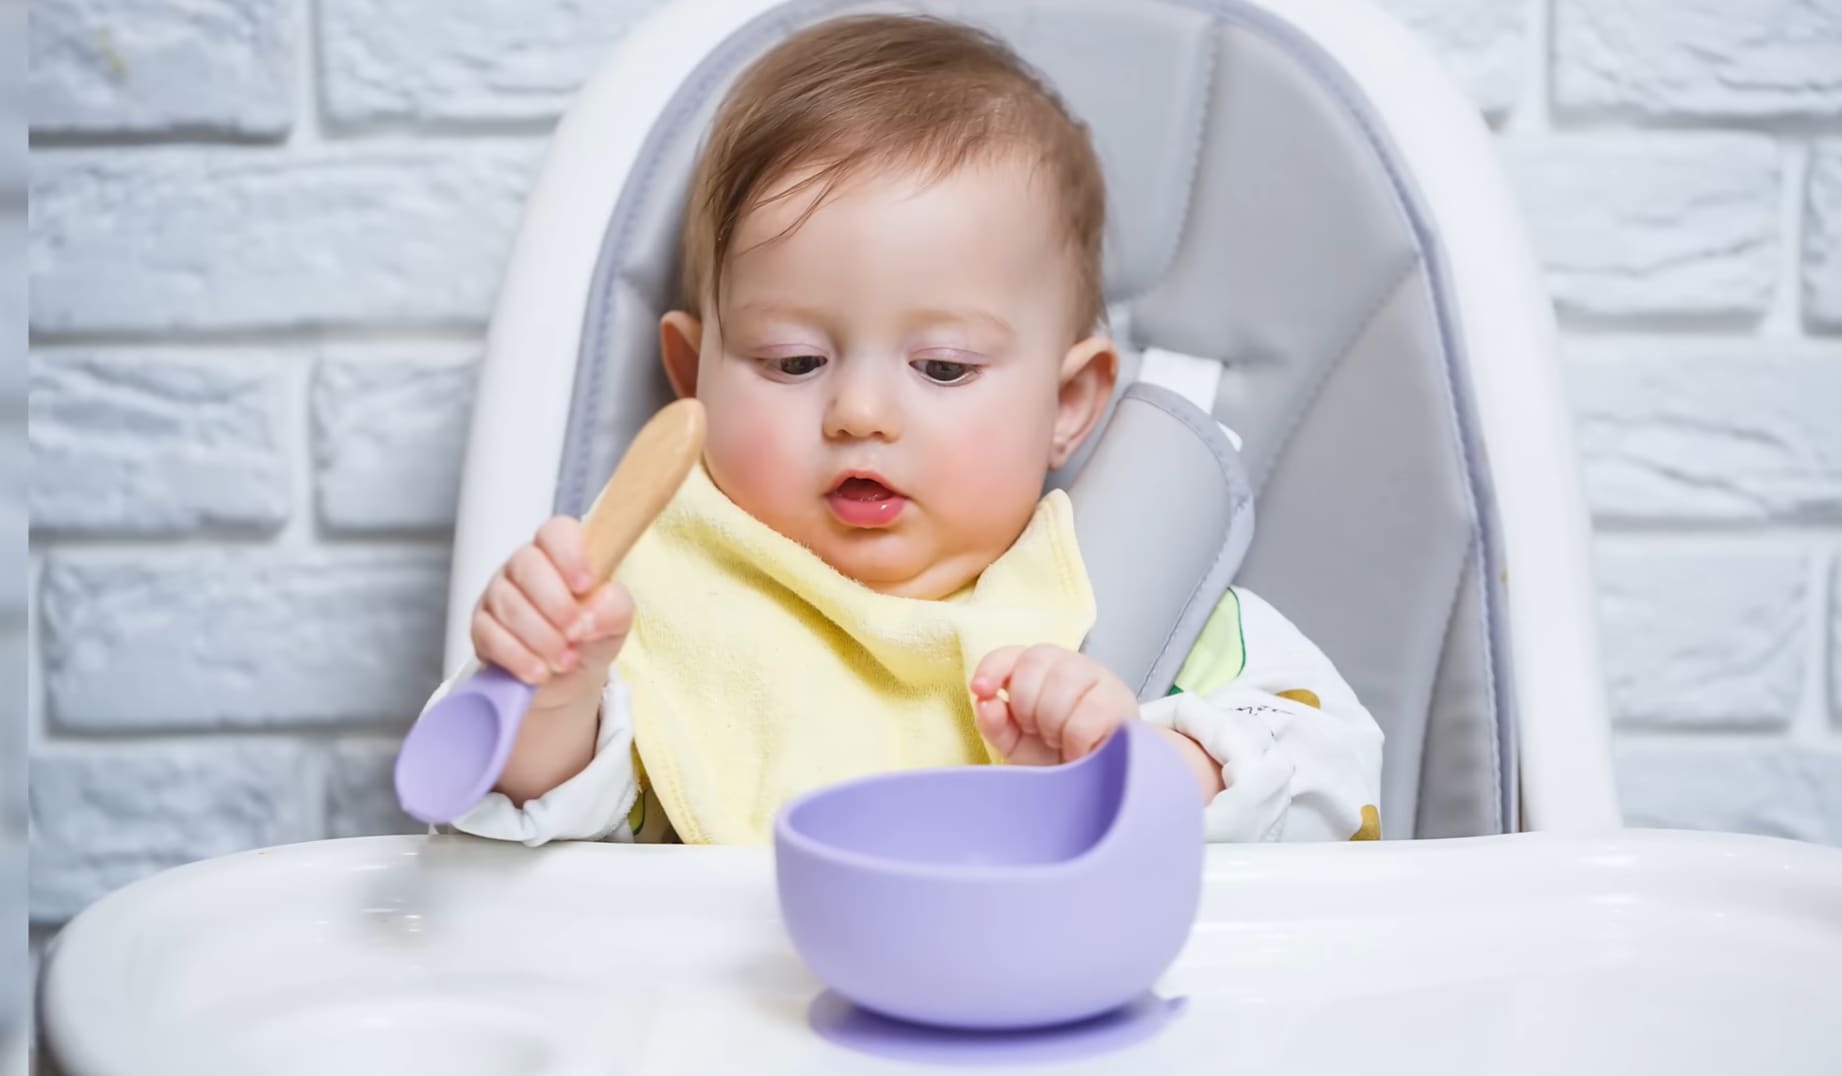 when can babies eat baby food